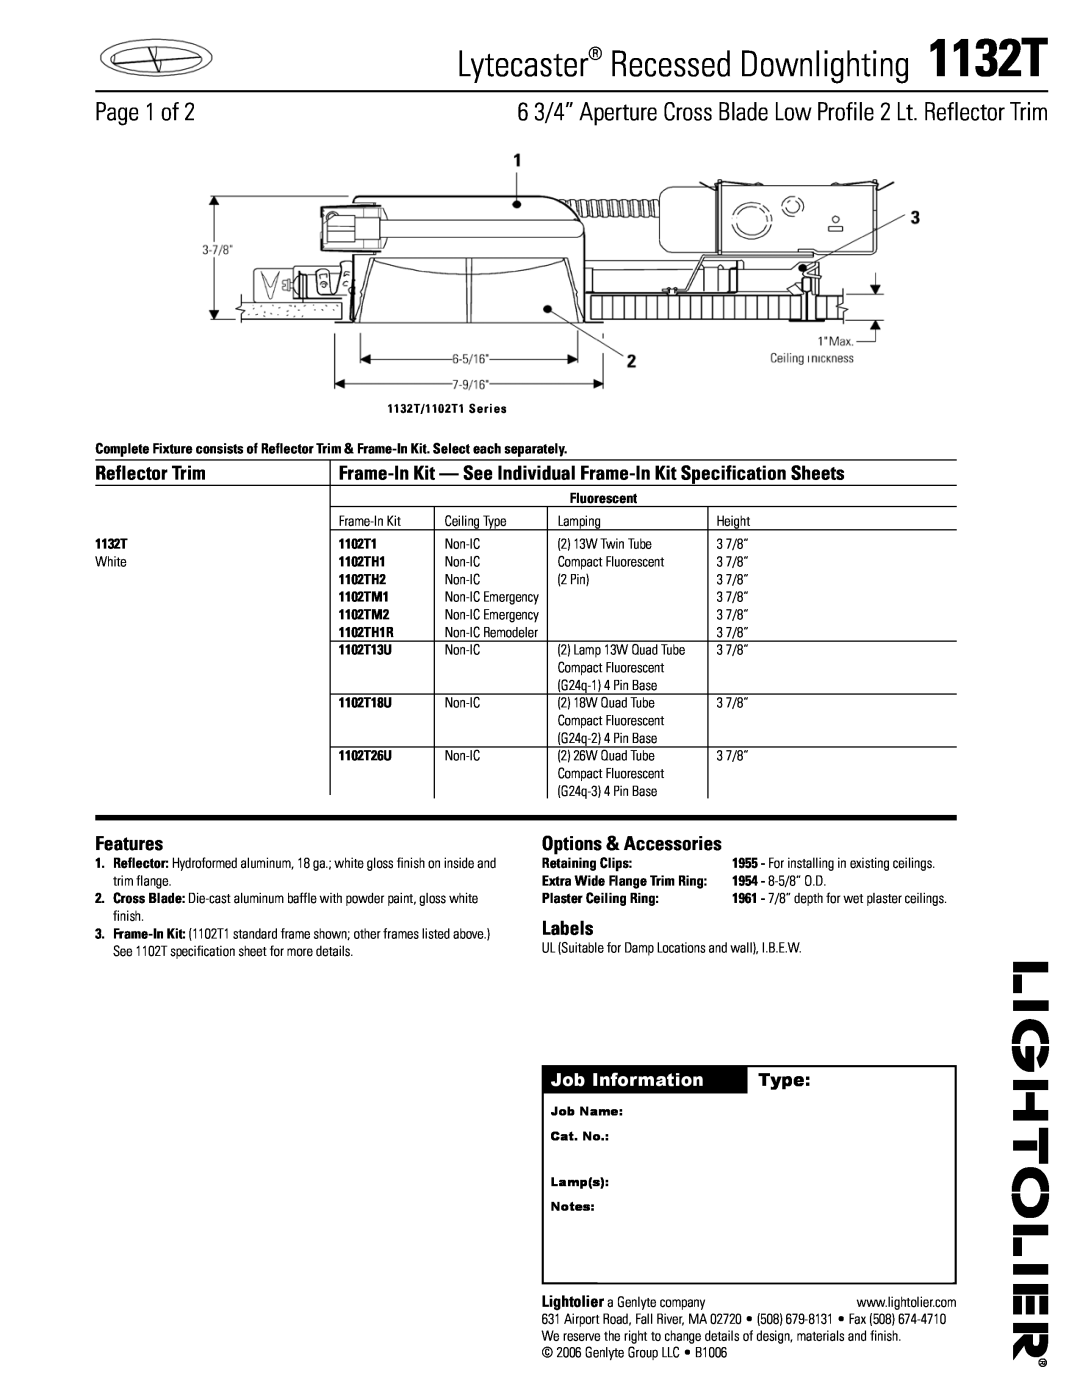 Lightolier specifications Lytecaster Recessed Downlighting 1132T, Page  of, Job Information, Type, Reflector Trim 